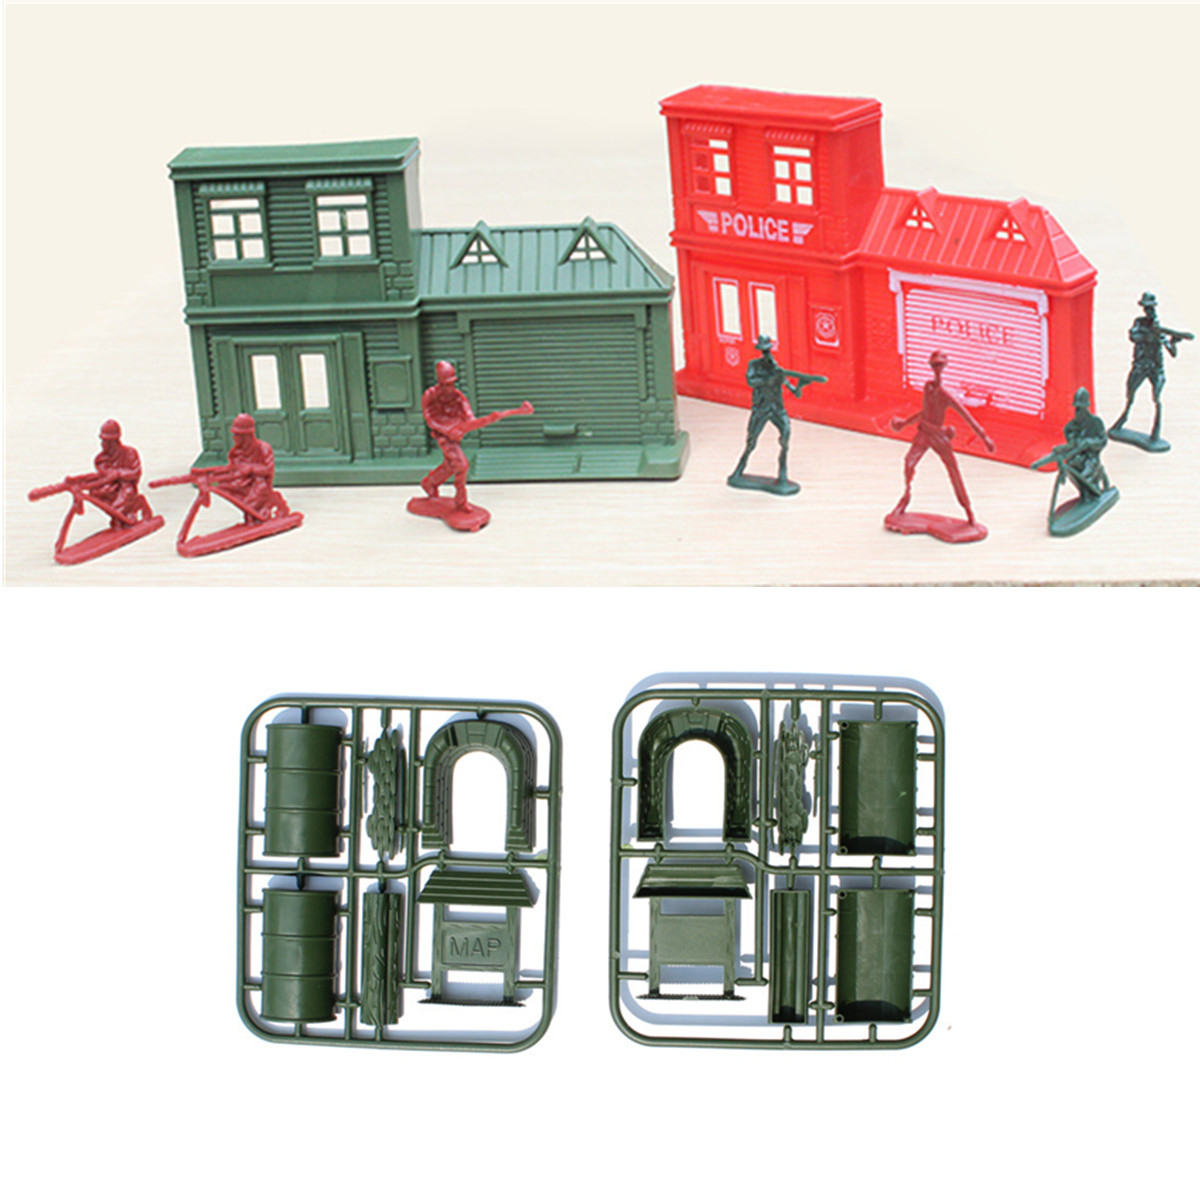 330pcs Military Plastic Model Playset Toy Soldiers Figures & Accessories Kid Toys